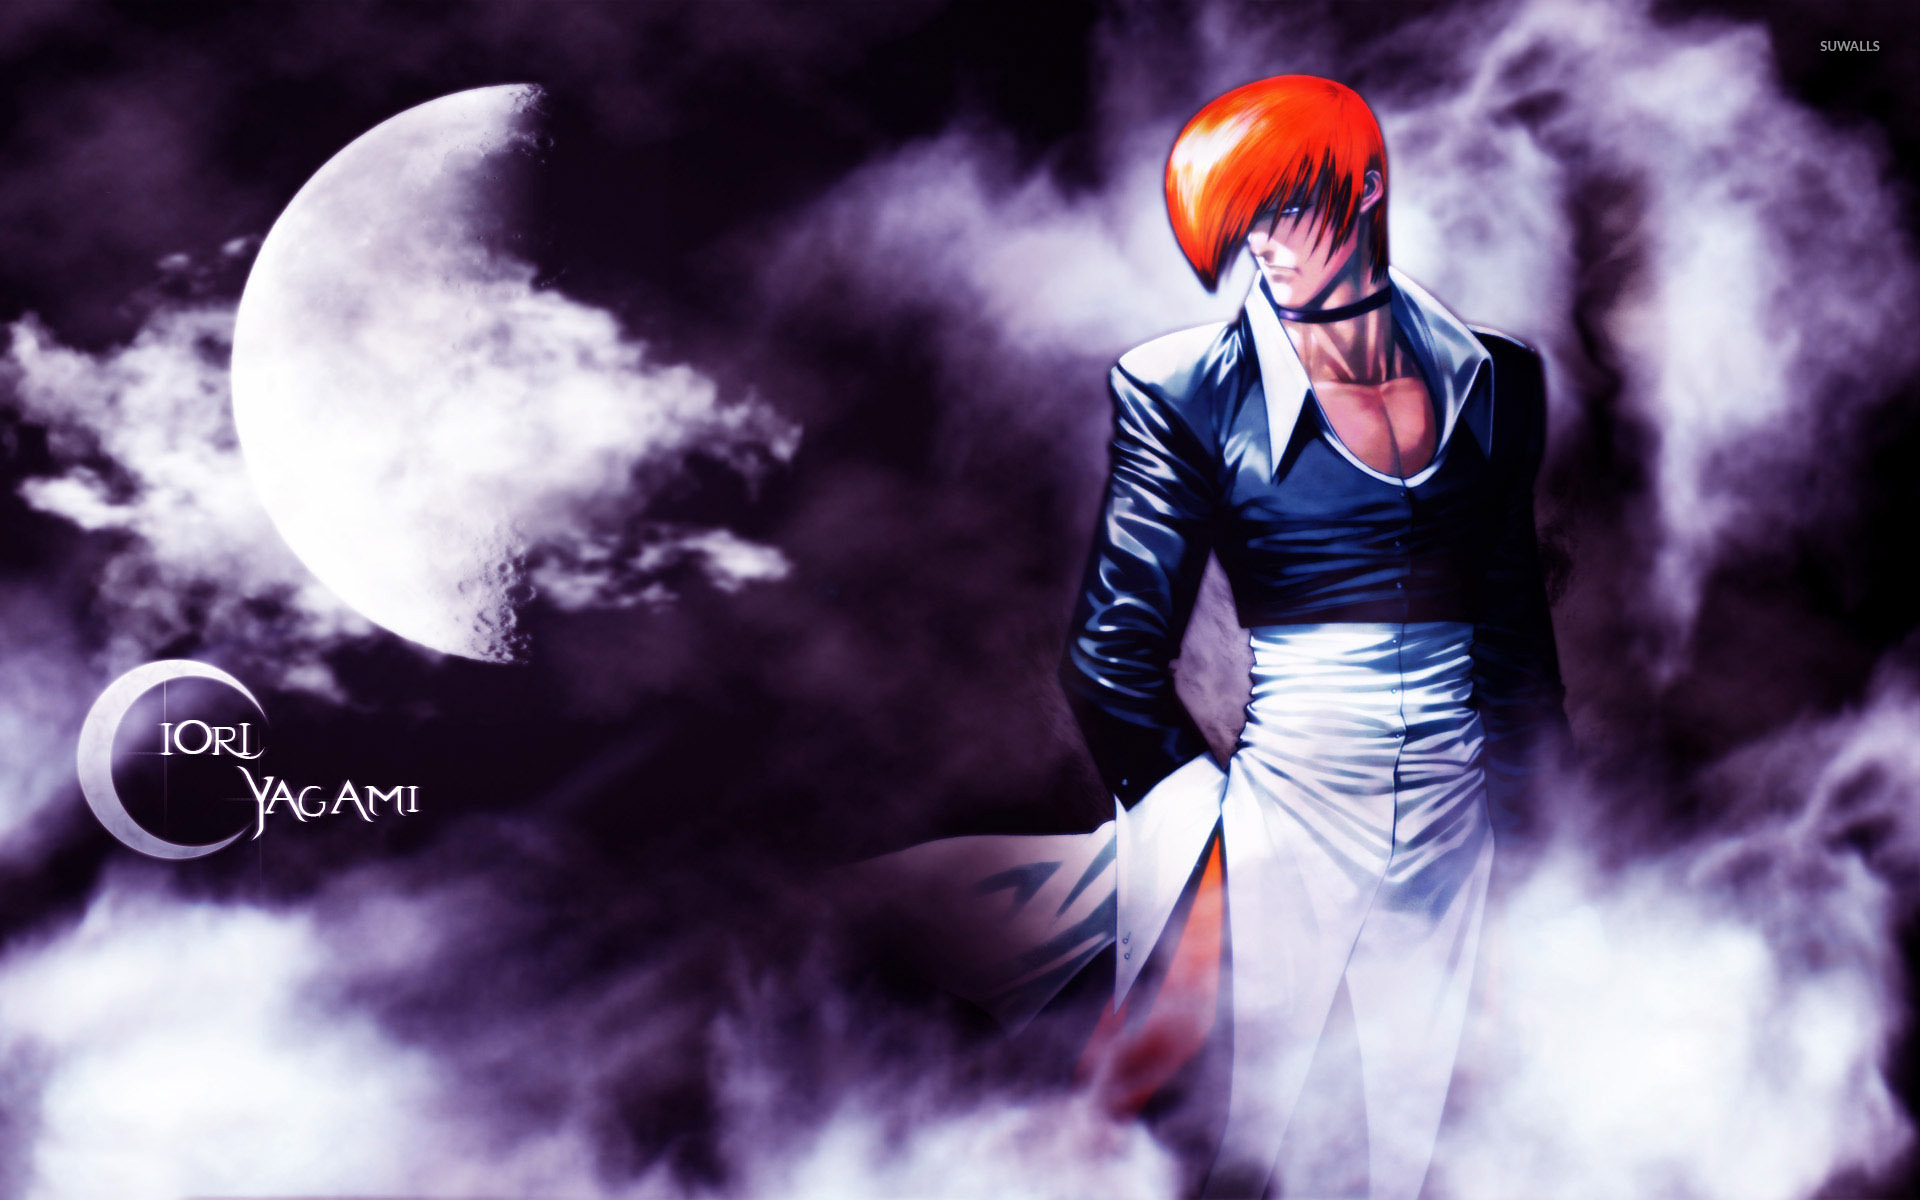 Iori Yagami - The King of Fighters wallpaper - Game ...